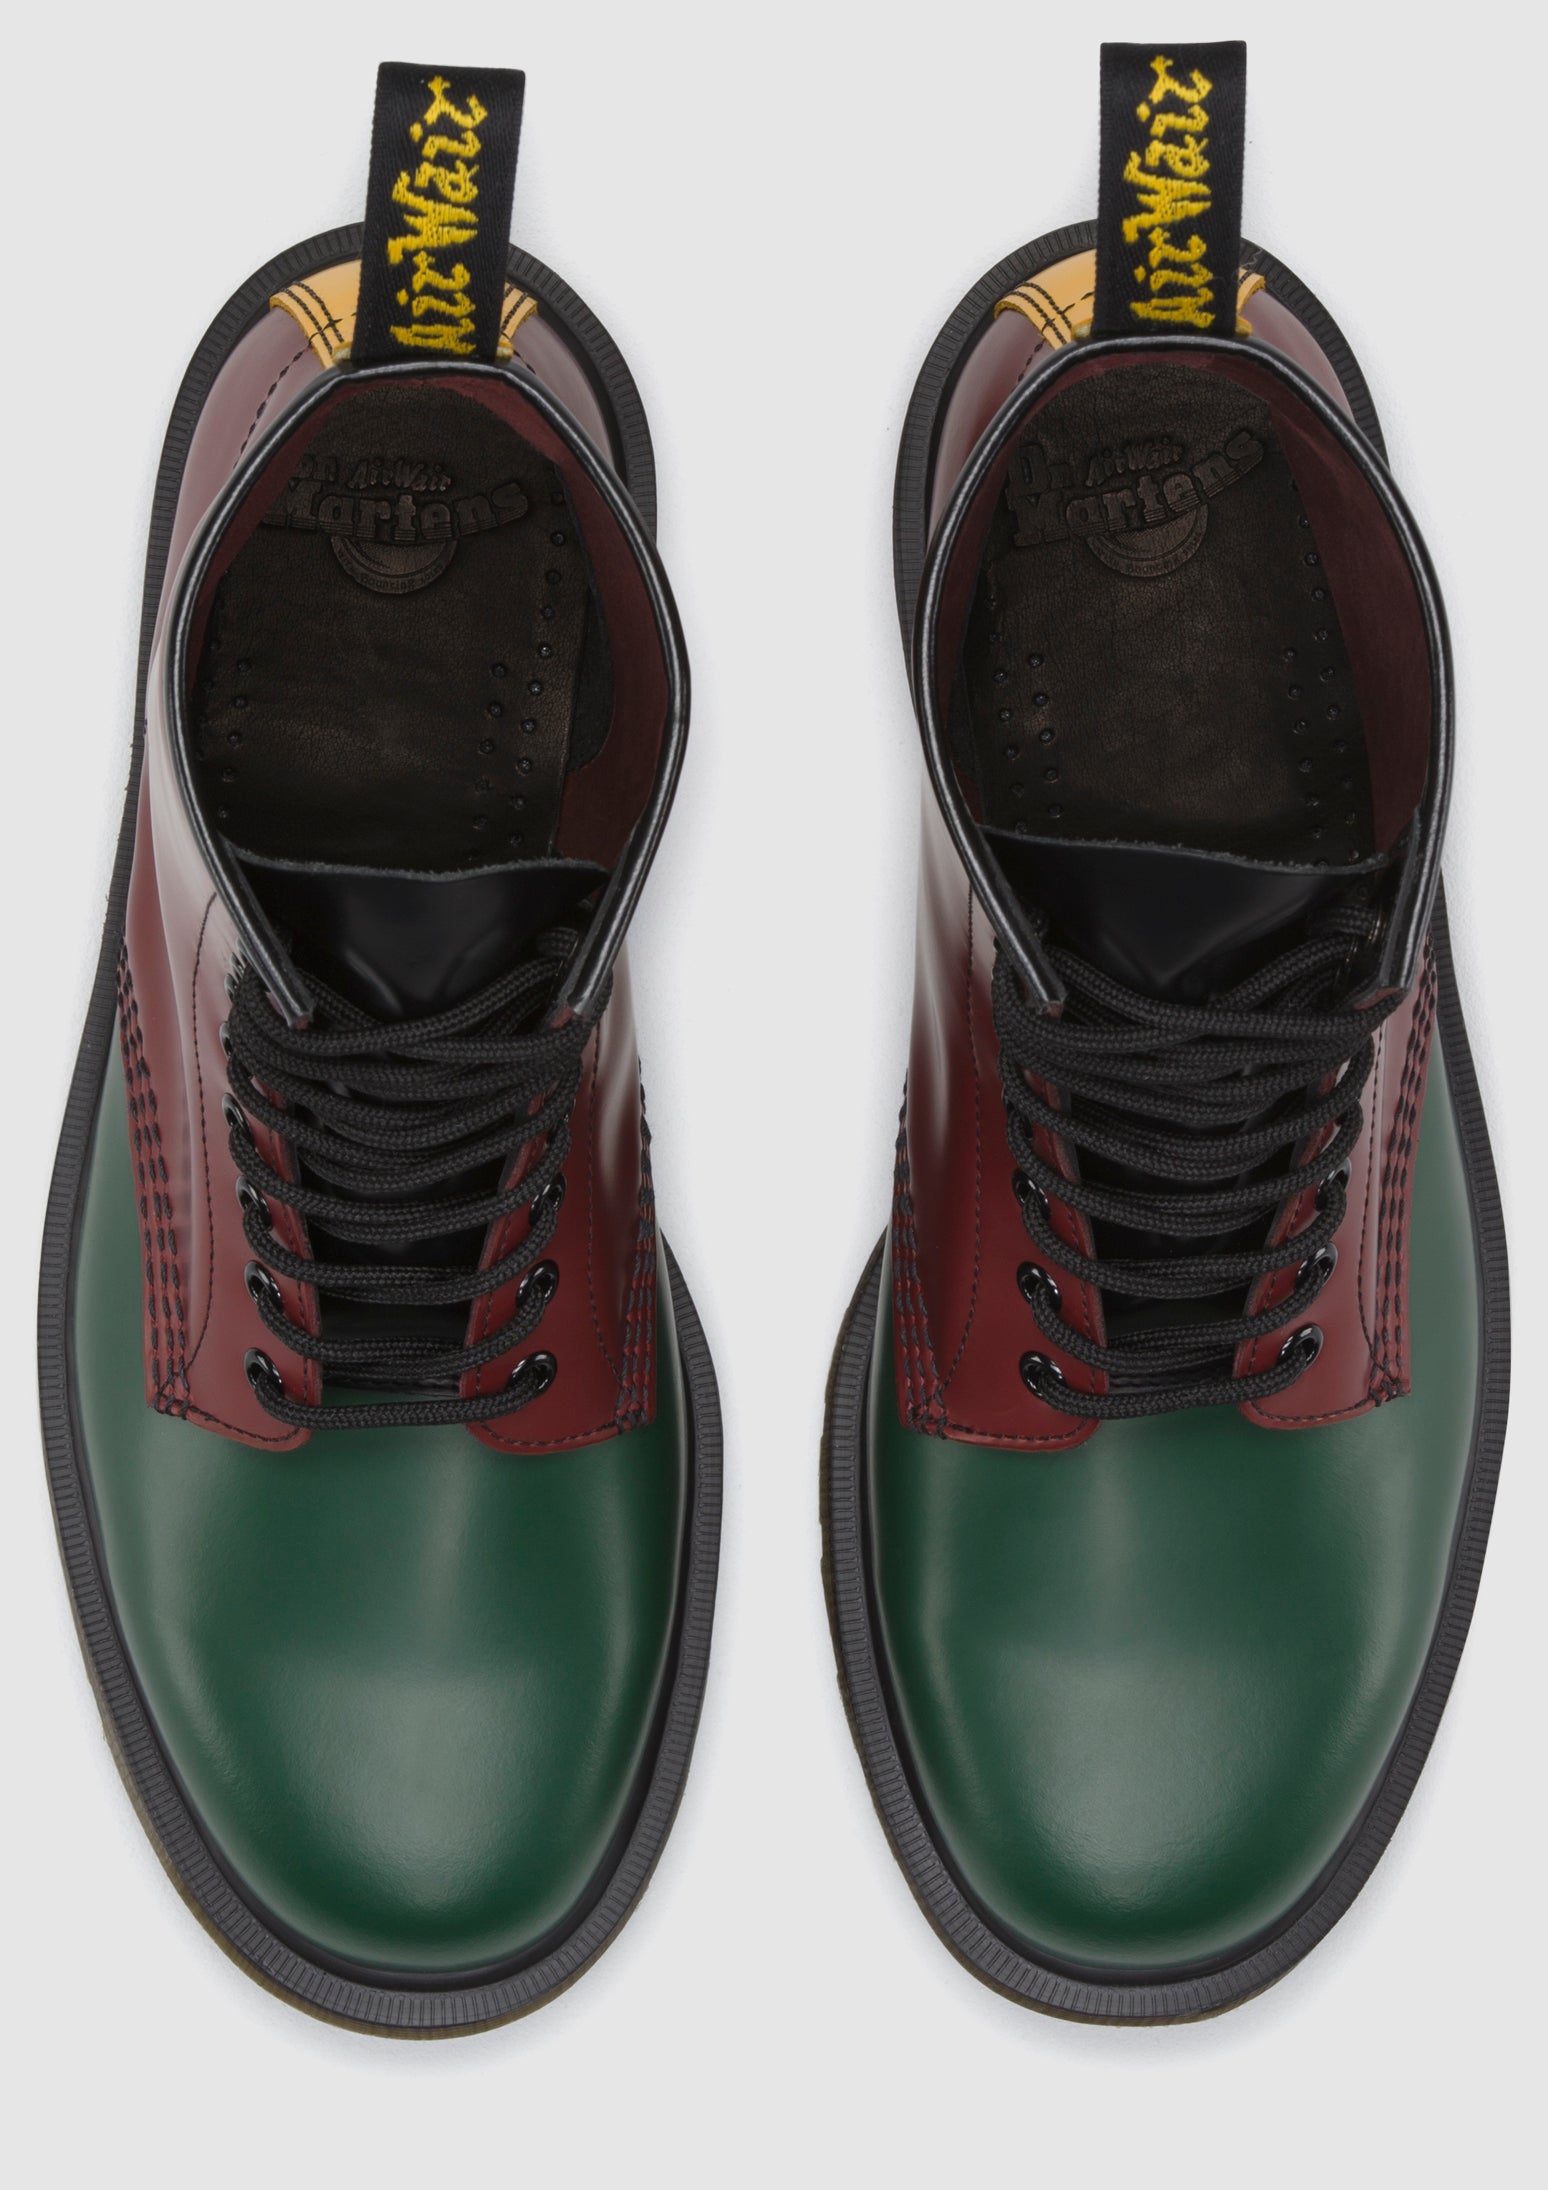 1460 GREEN+CHERRY RED+YELLOW SMOOTH BOOT